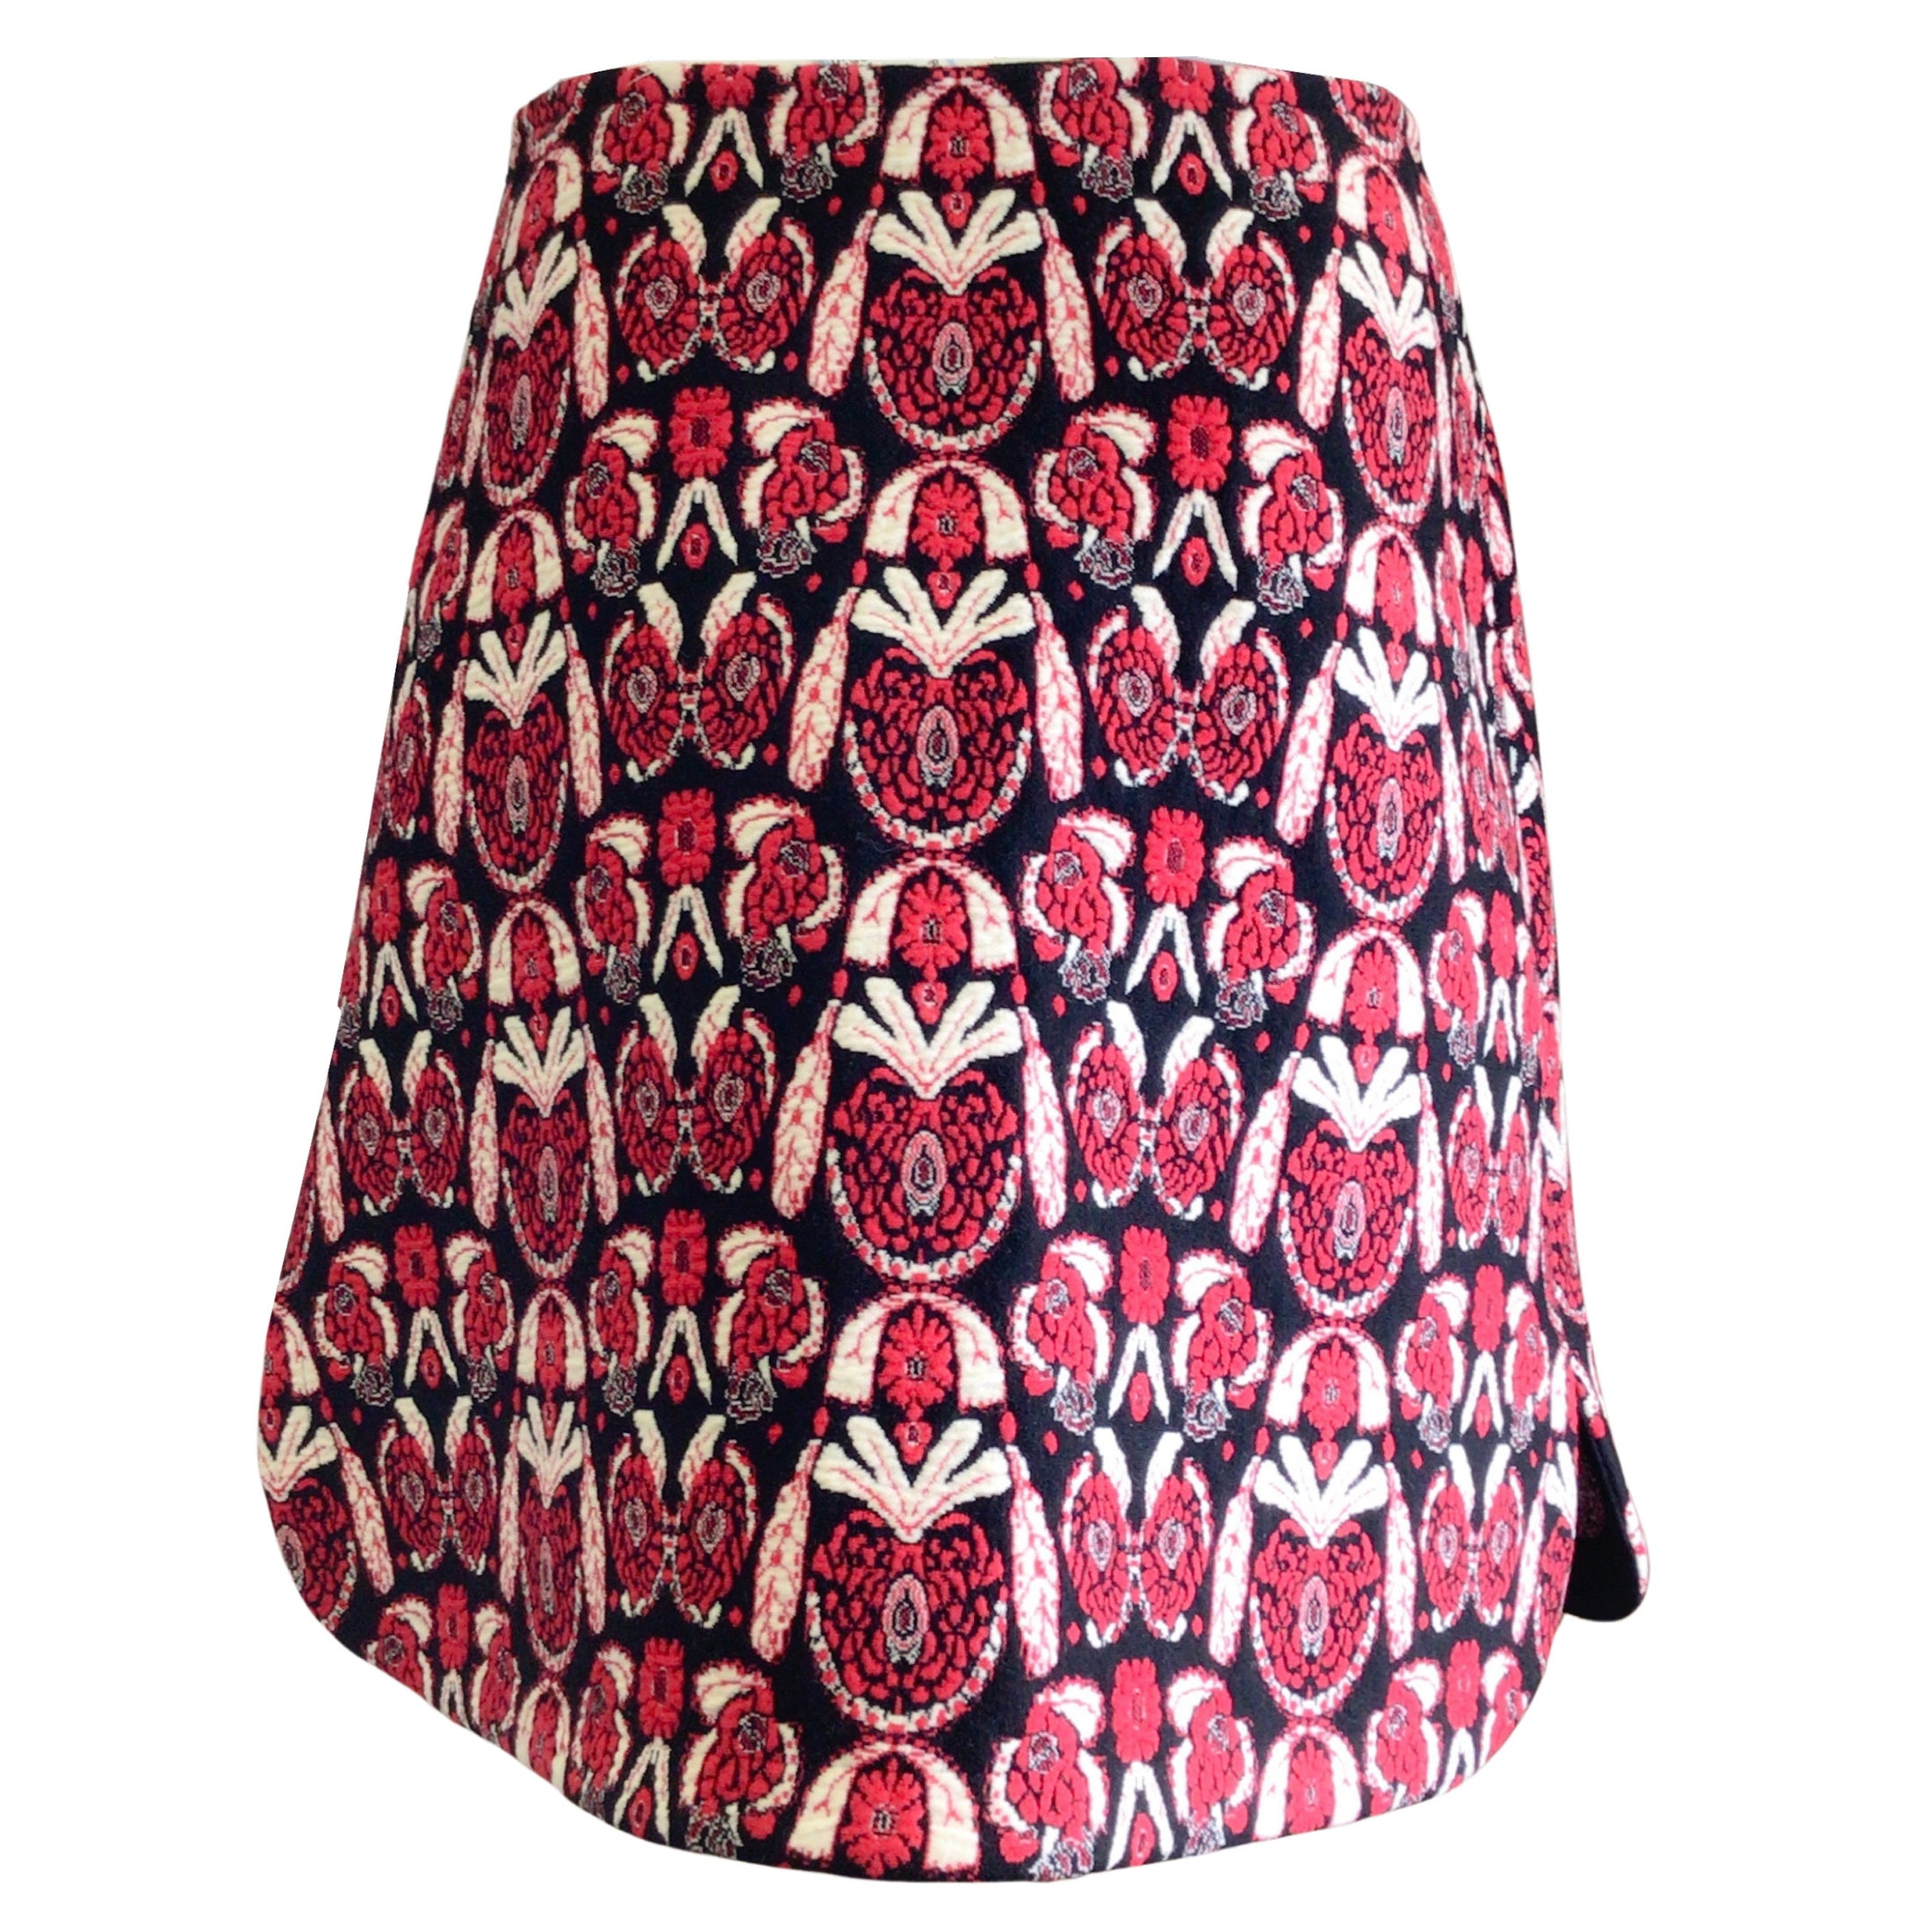 Alaia Black / Ivory / Red Wool Knit Skirt